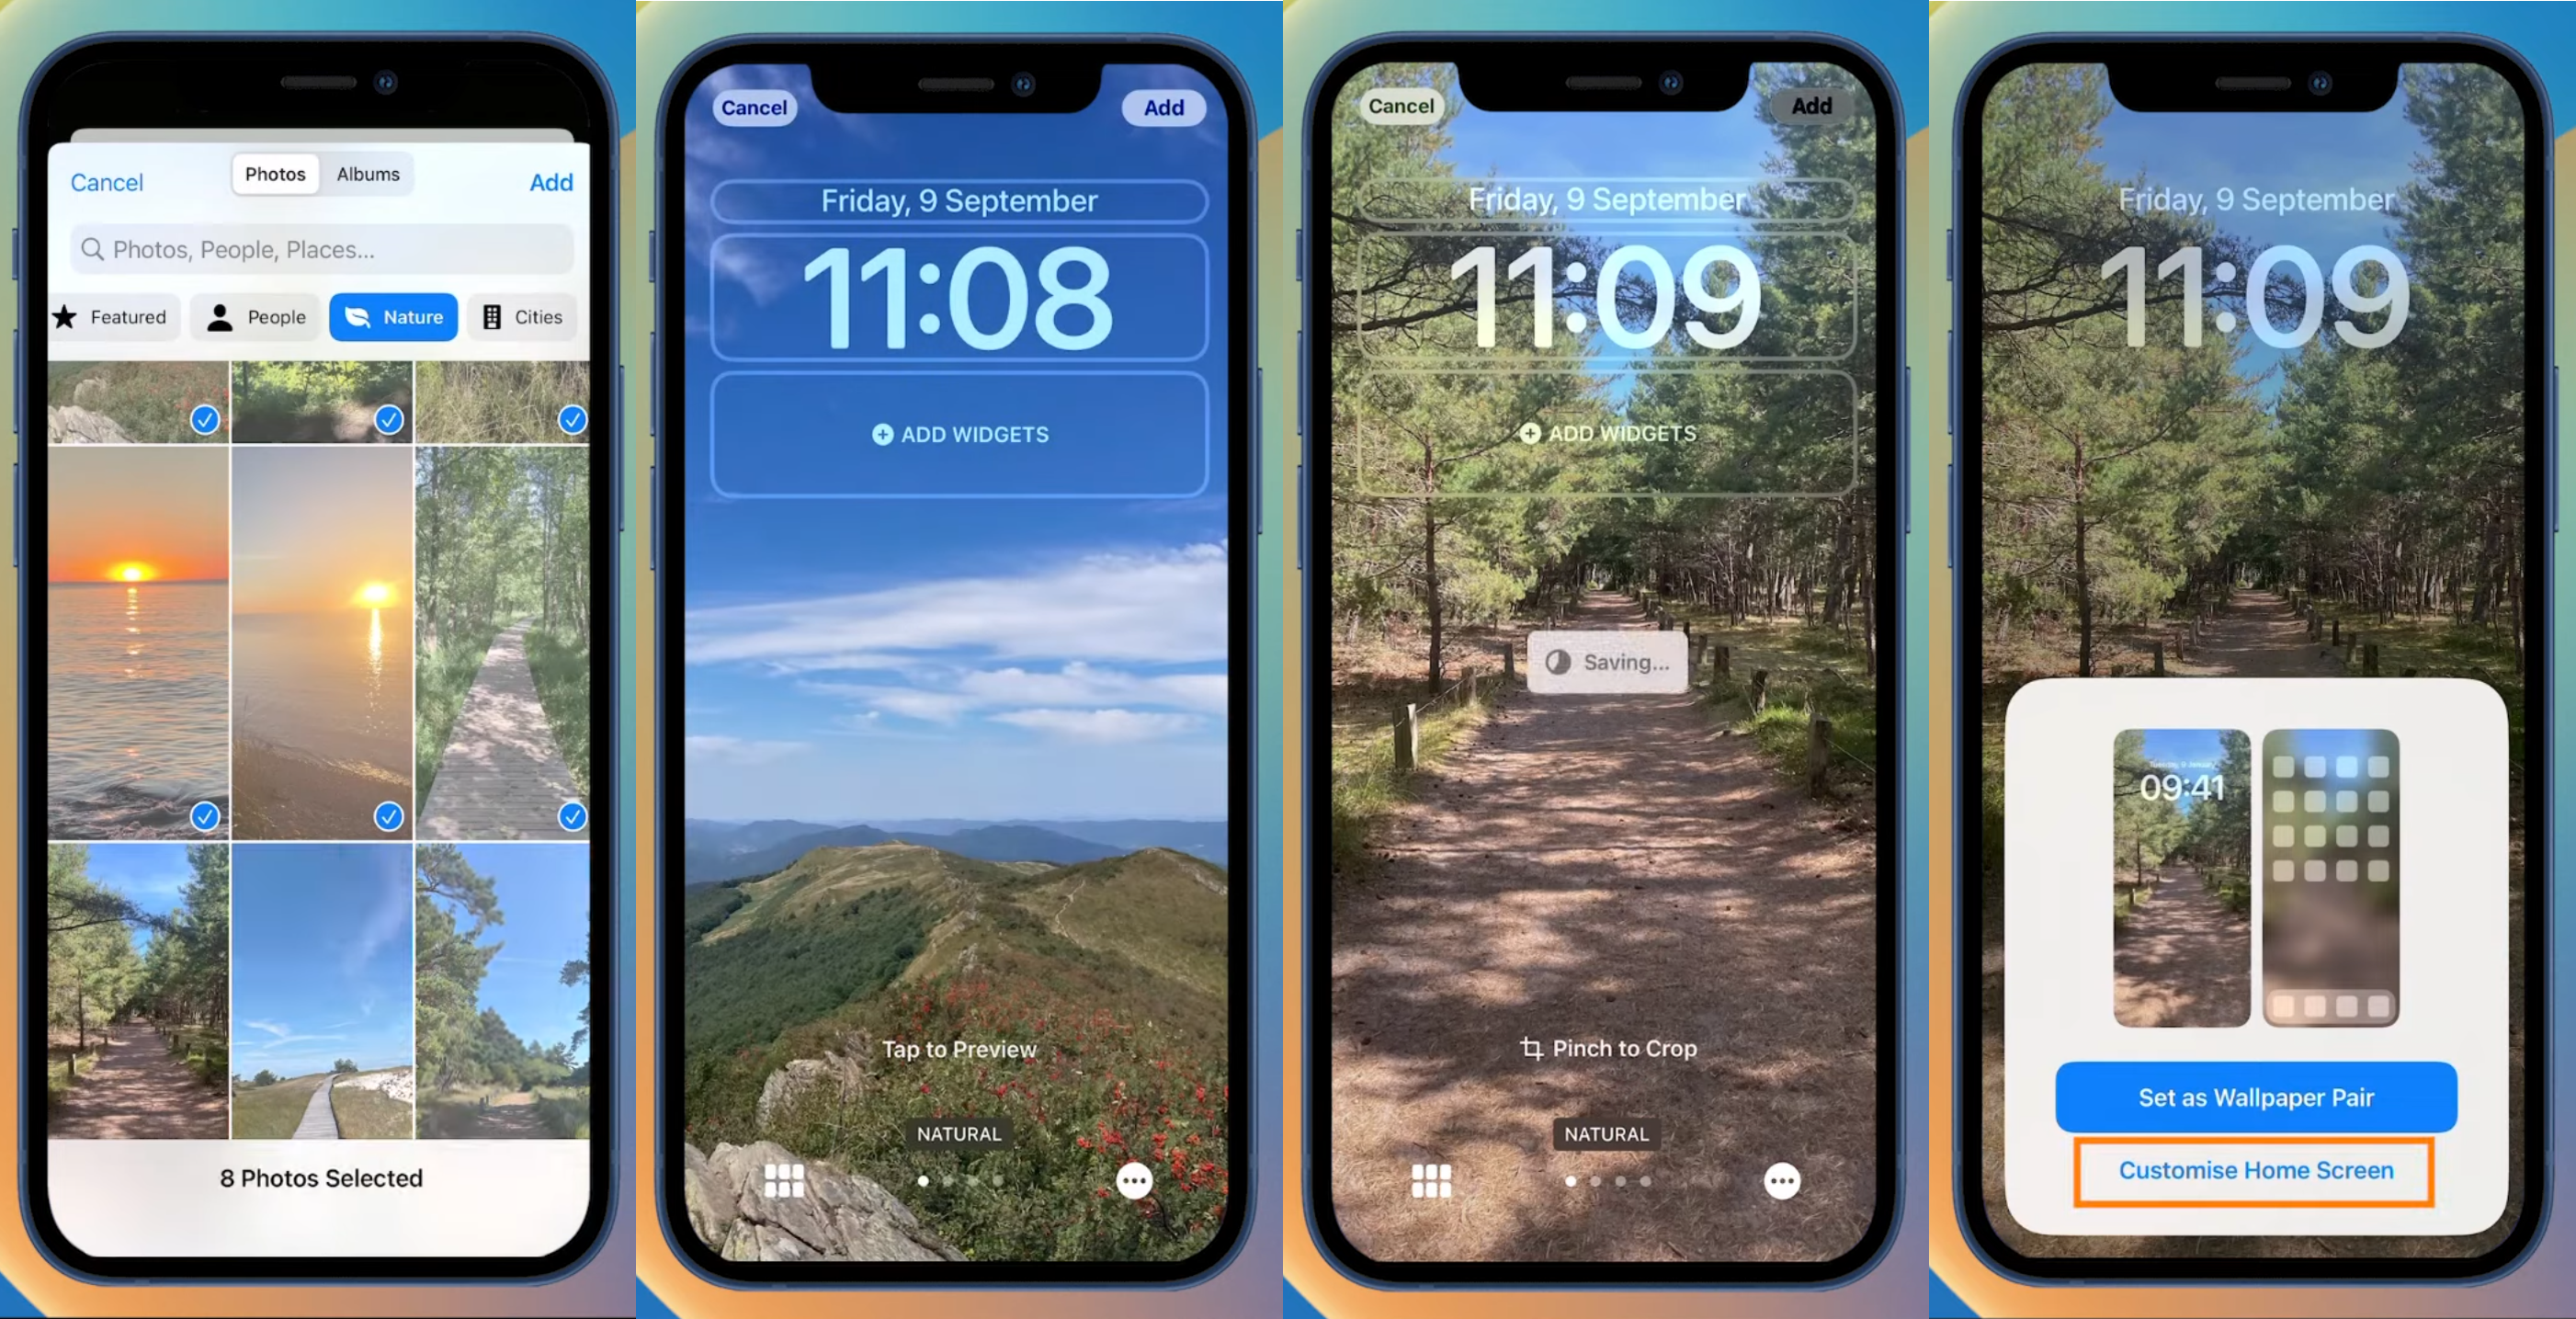 enable Image Shuffle on your iPhone lock screen.